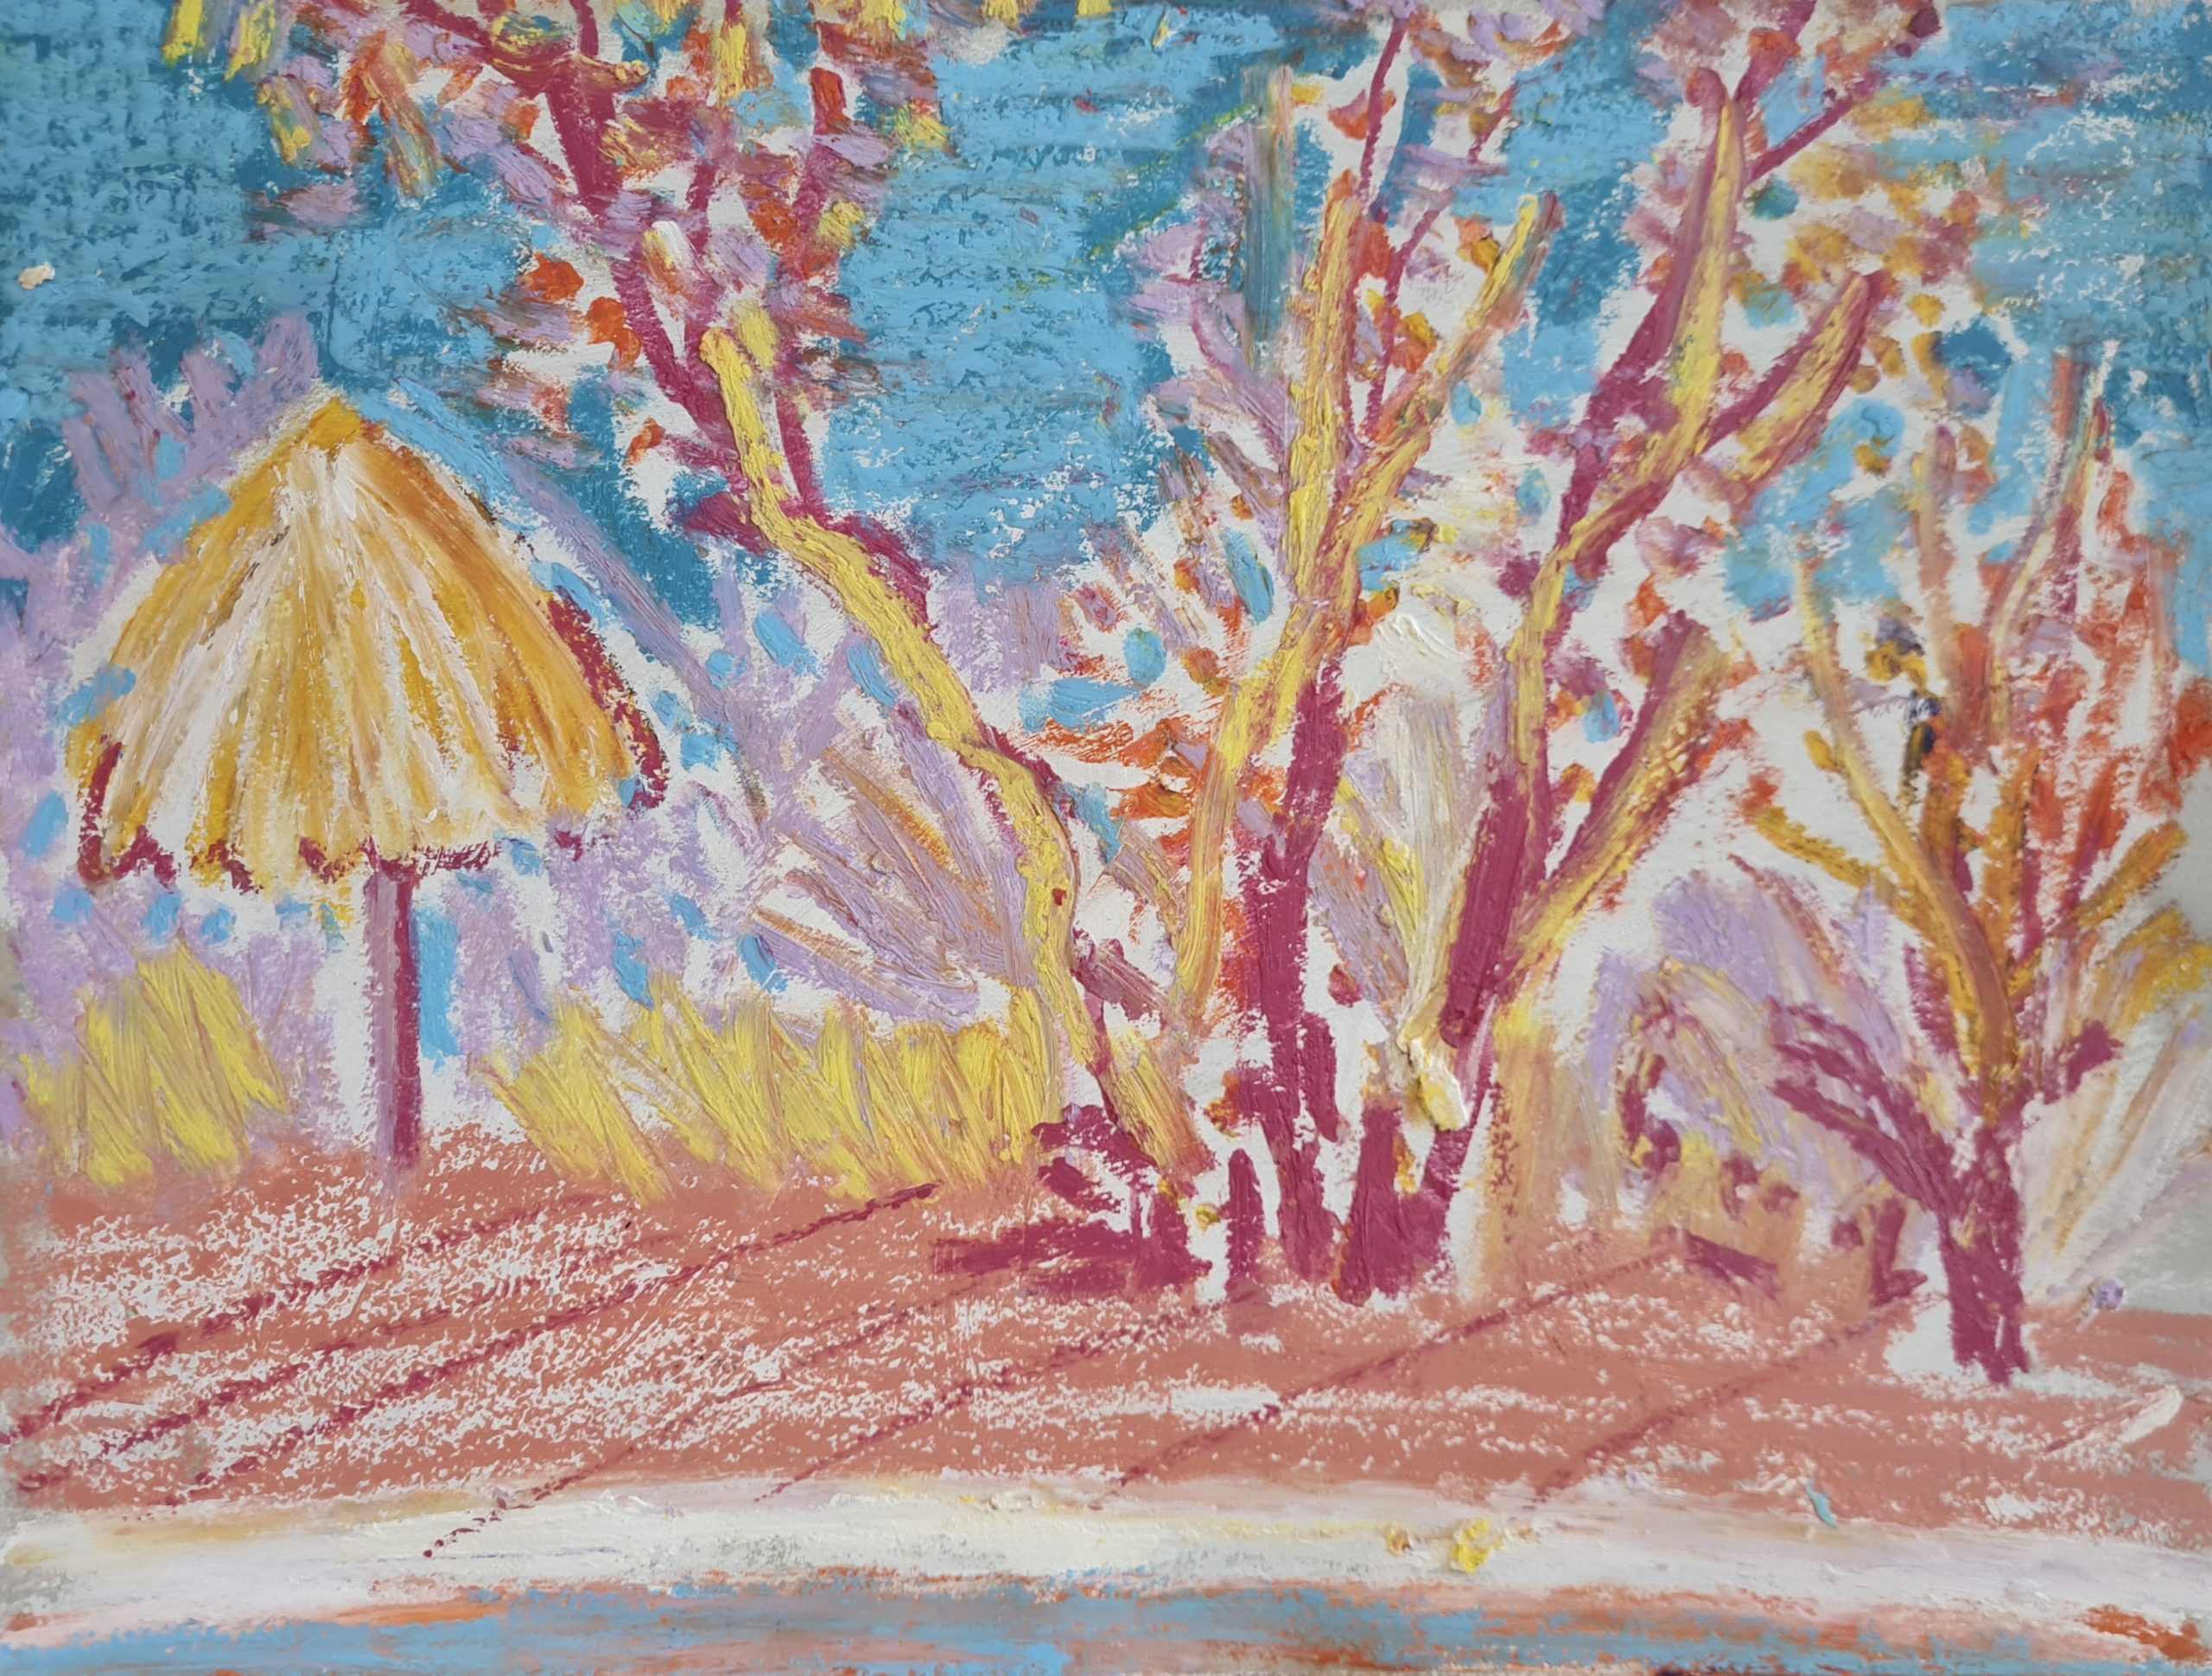 Red and yellow sketeches from oil pastels of trees and a hut